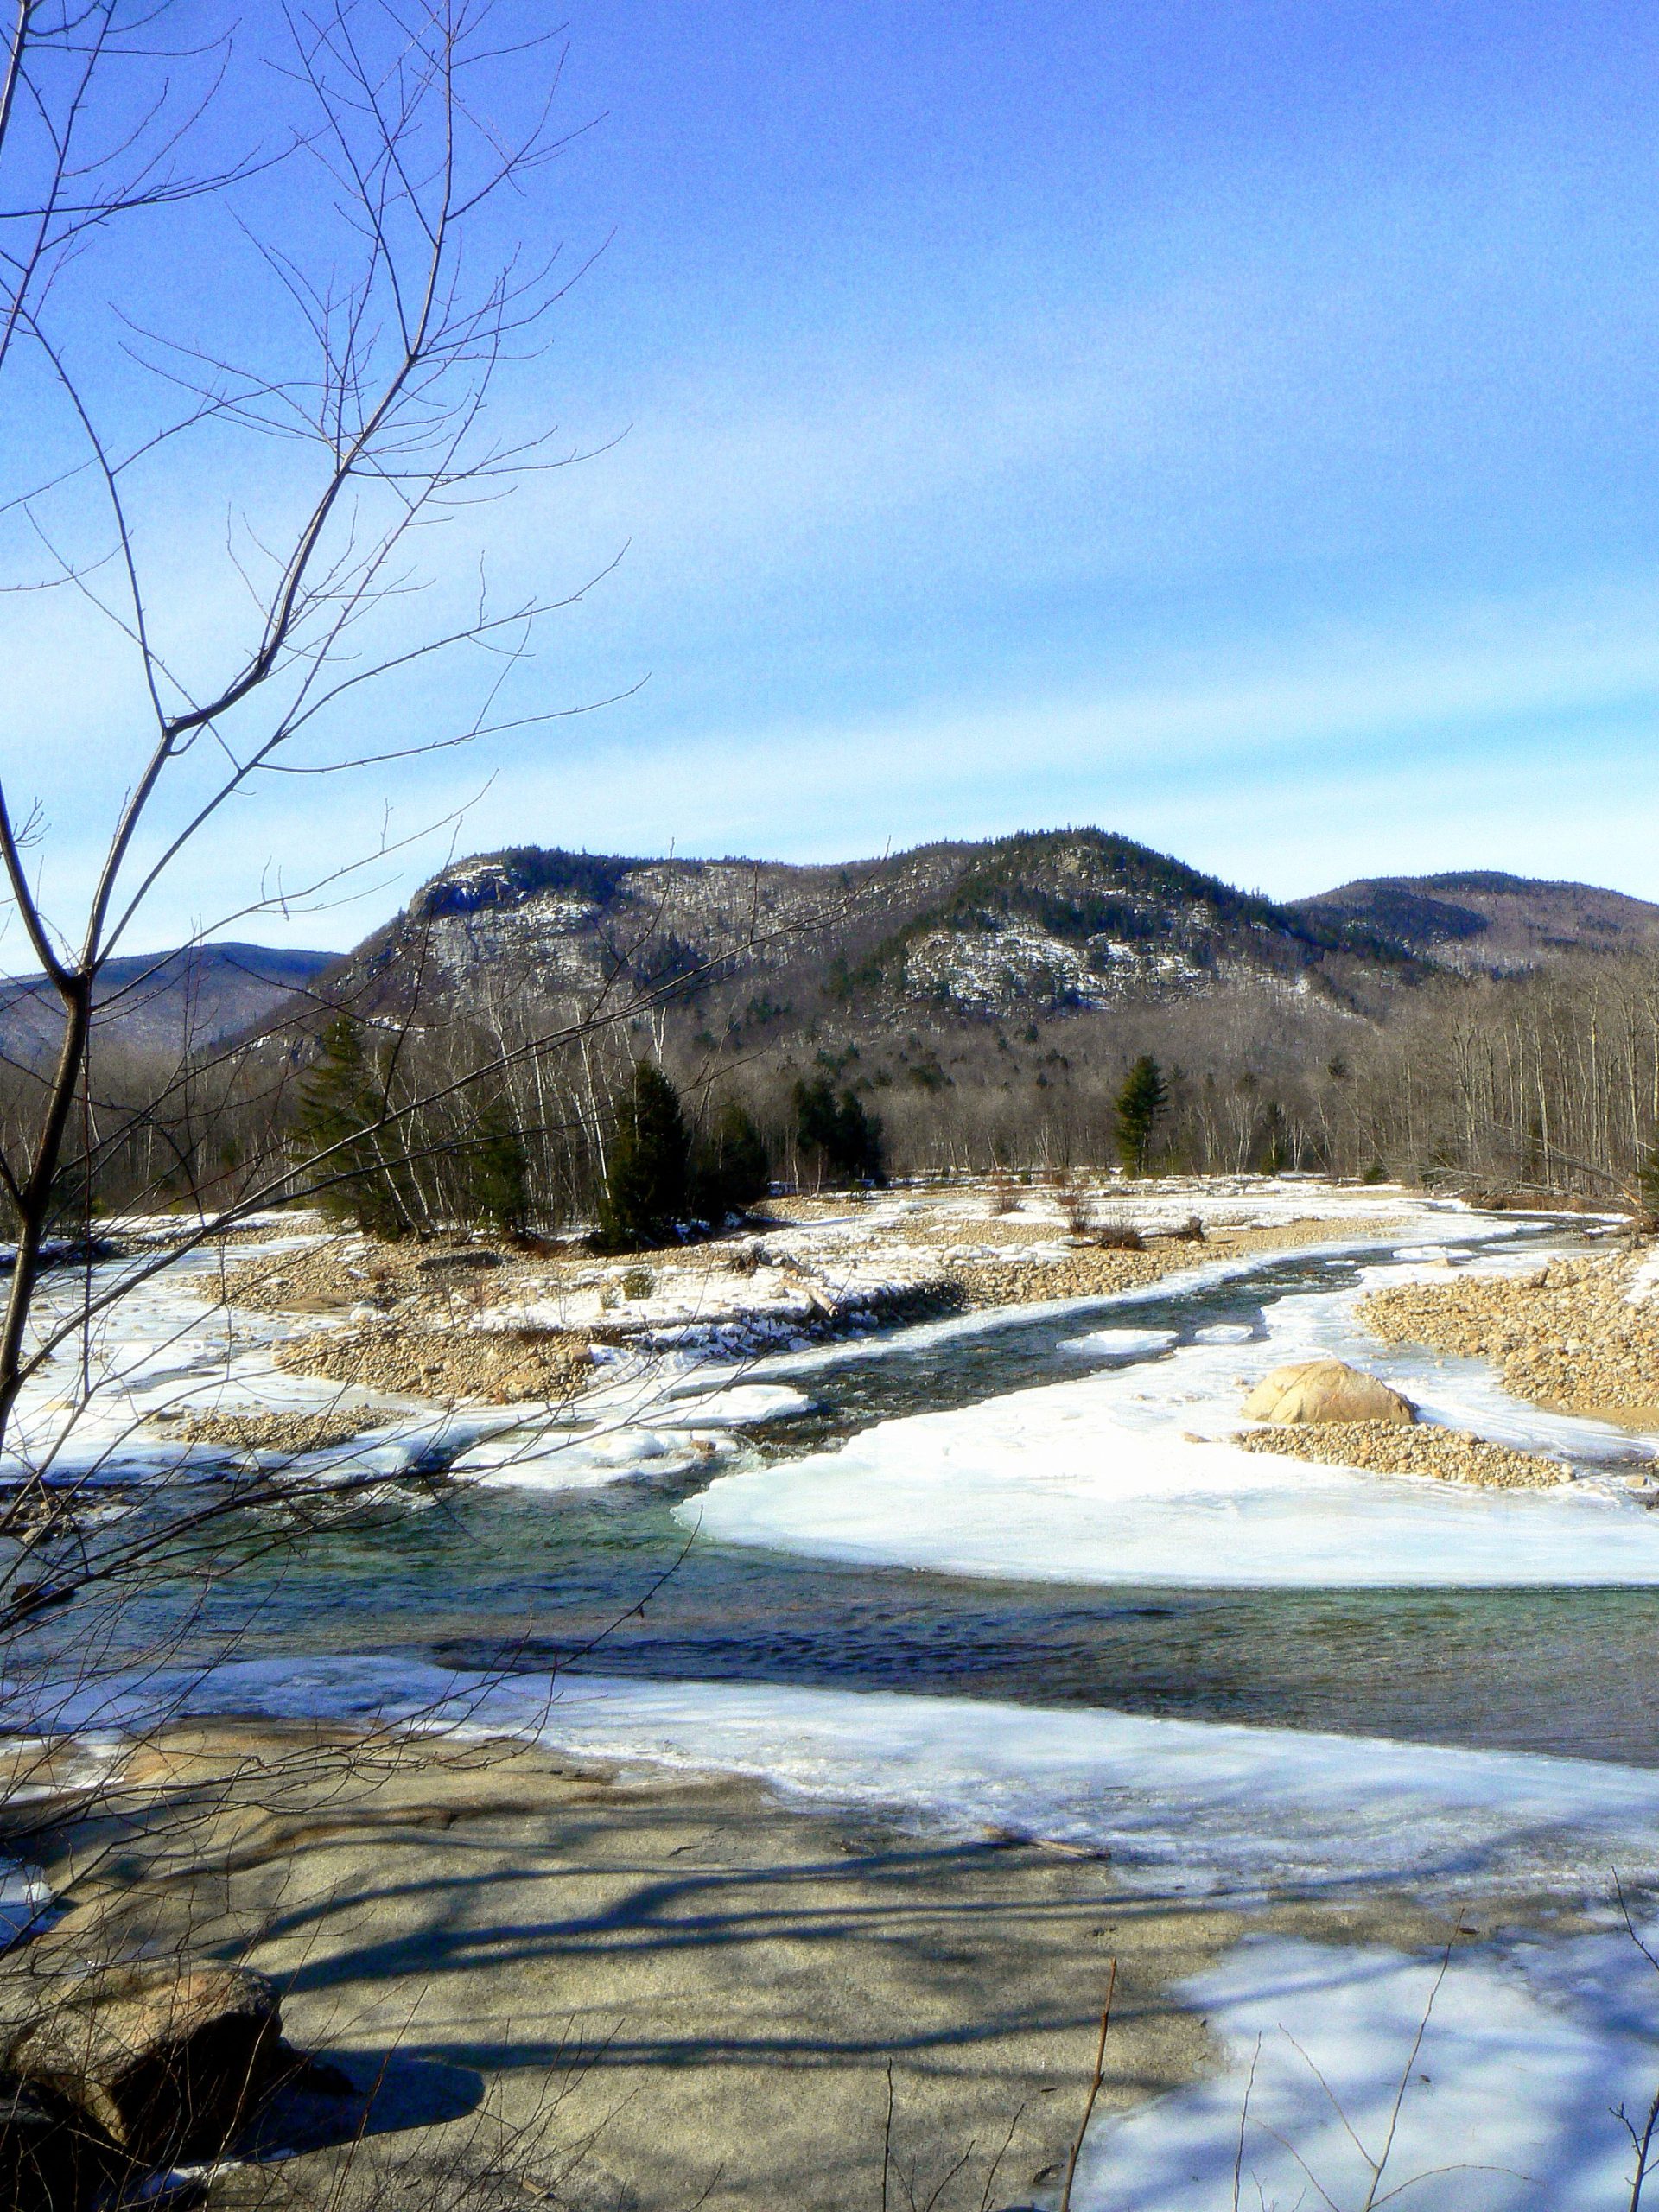 Saco River, Bartlett, New Hampshire (user submitted)